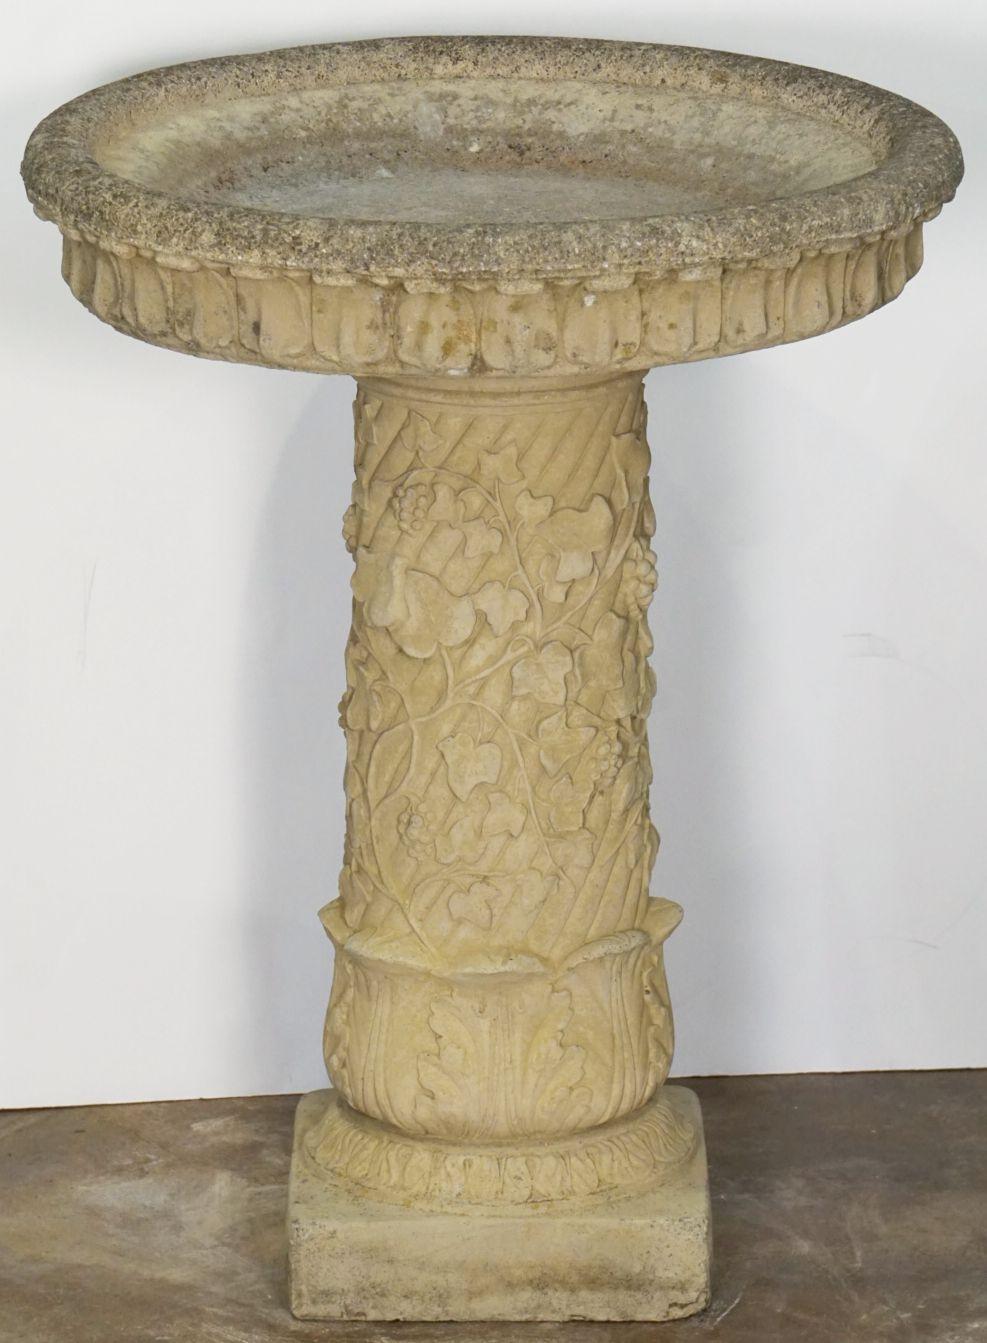  Large English Garden Stone Bird Bath with Faux Ivy Relief 6